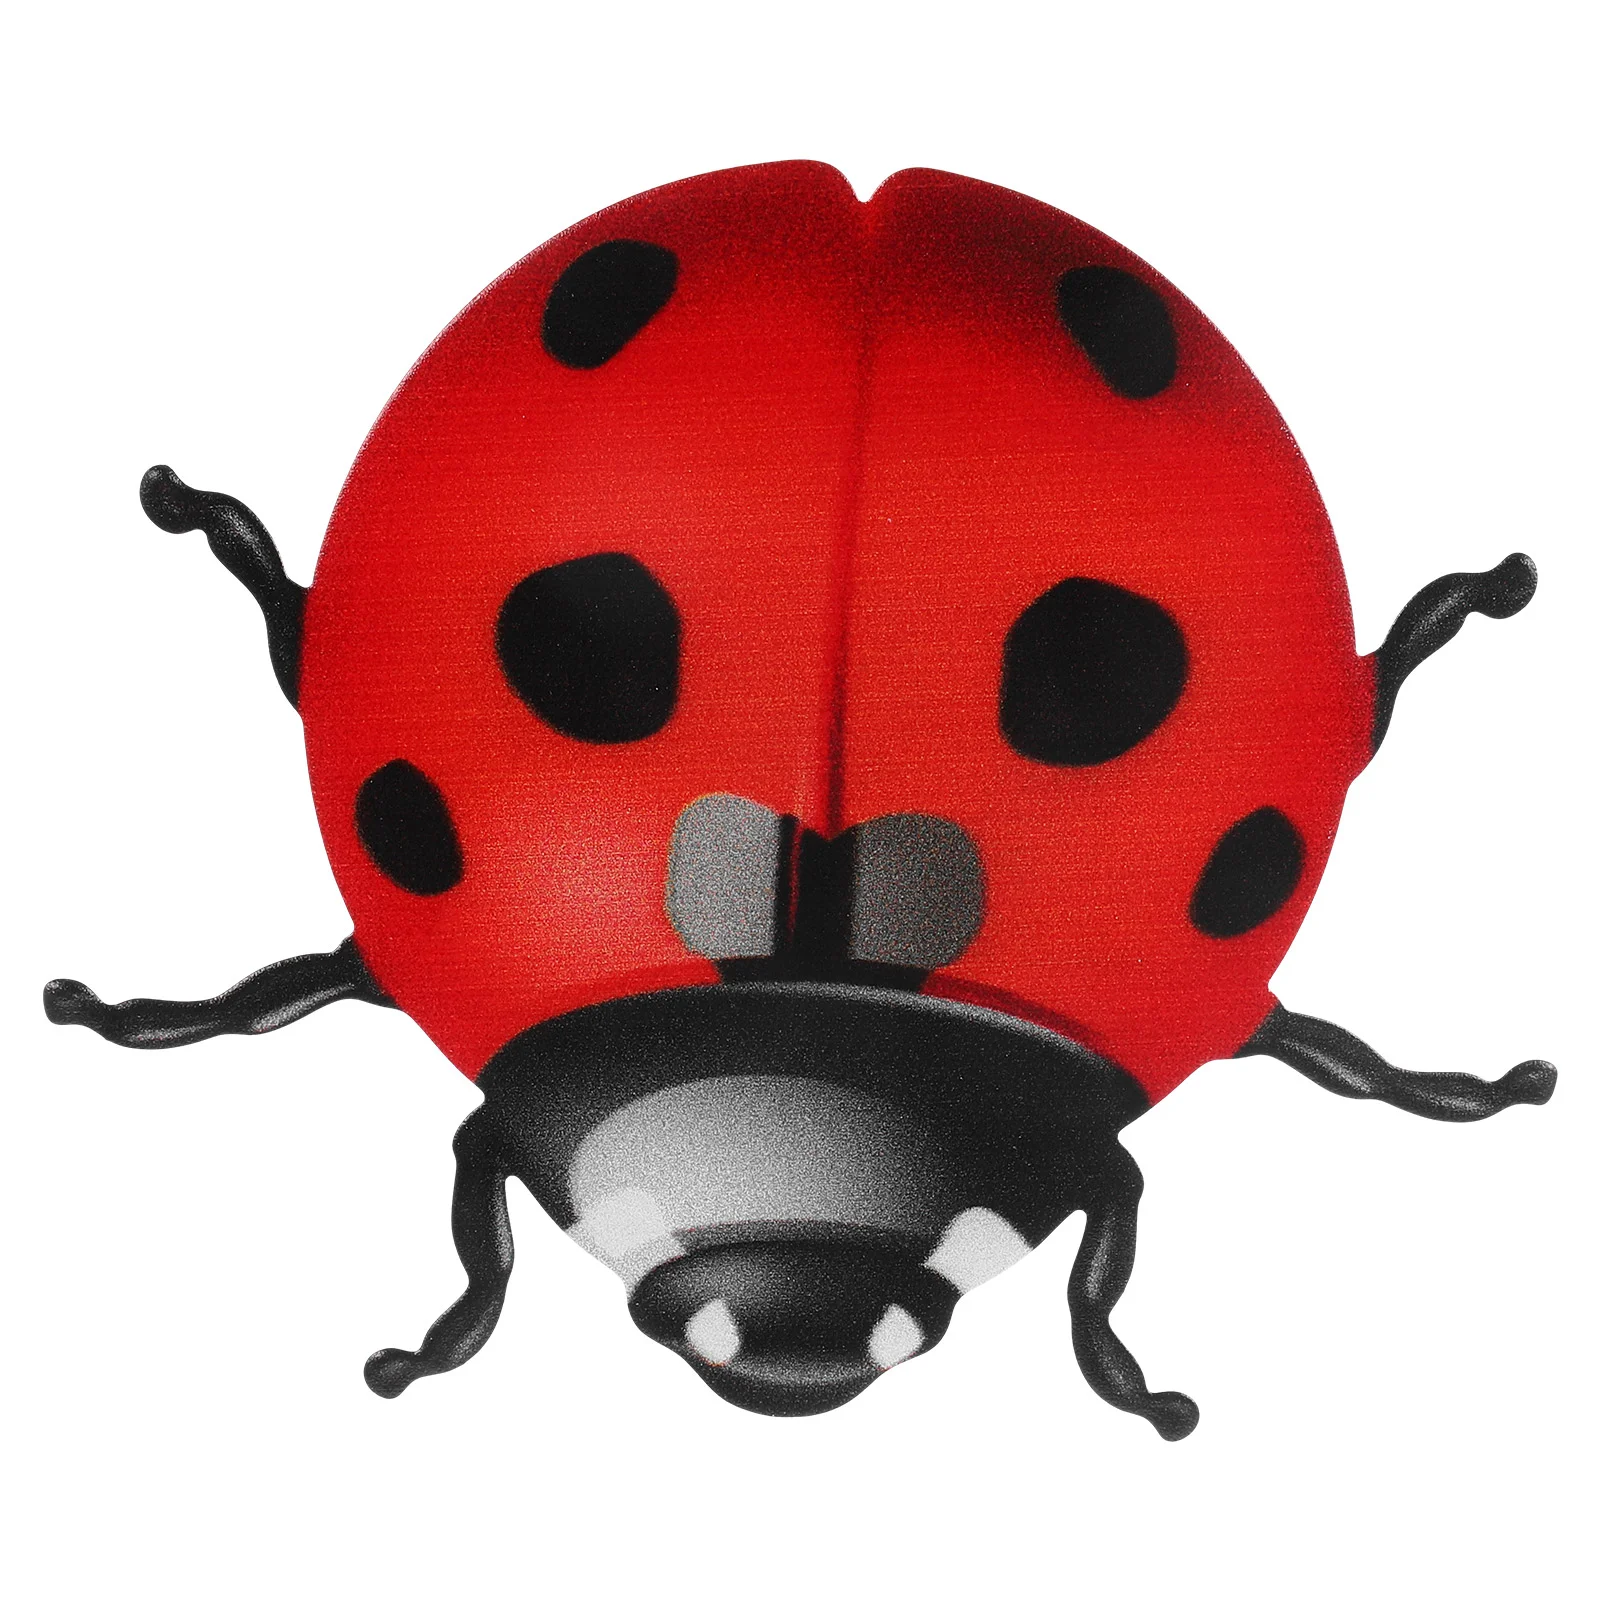 

Iron Beetle Wall Decoration Ladybug Shaped Decorations Home Ladybugs House Metal Craft Sculpture Outdoor Yard Ornament